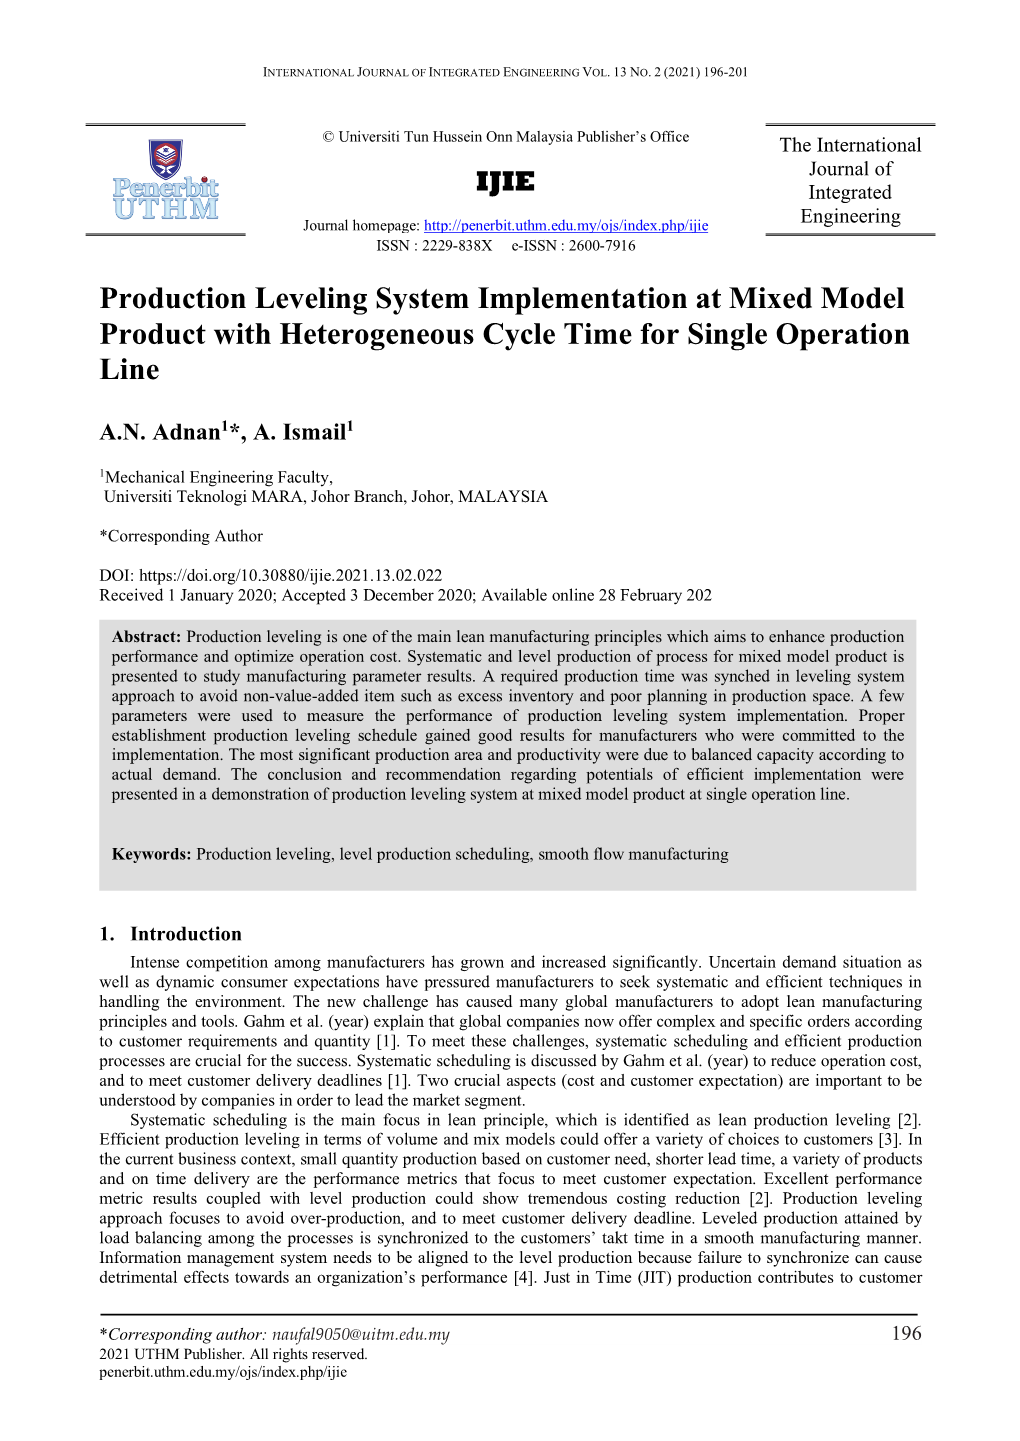 Production Leveling System Implementation at Mixed Model Product with Heterogeneous Cycle Time for Single Operation Line